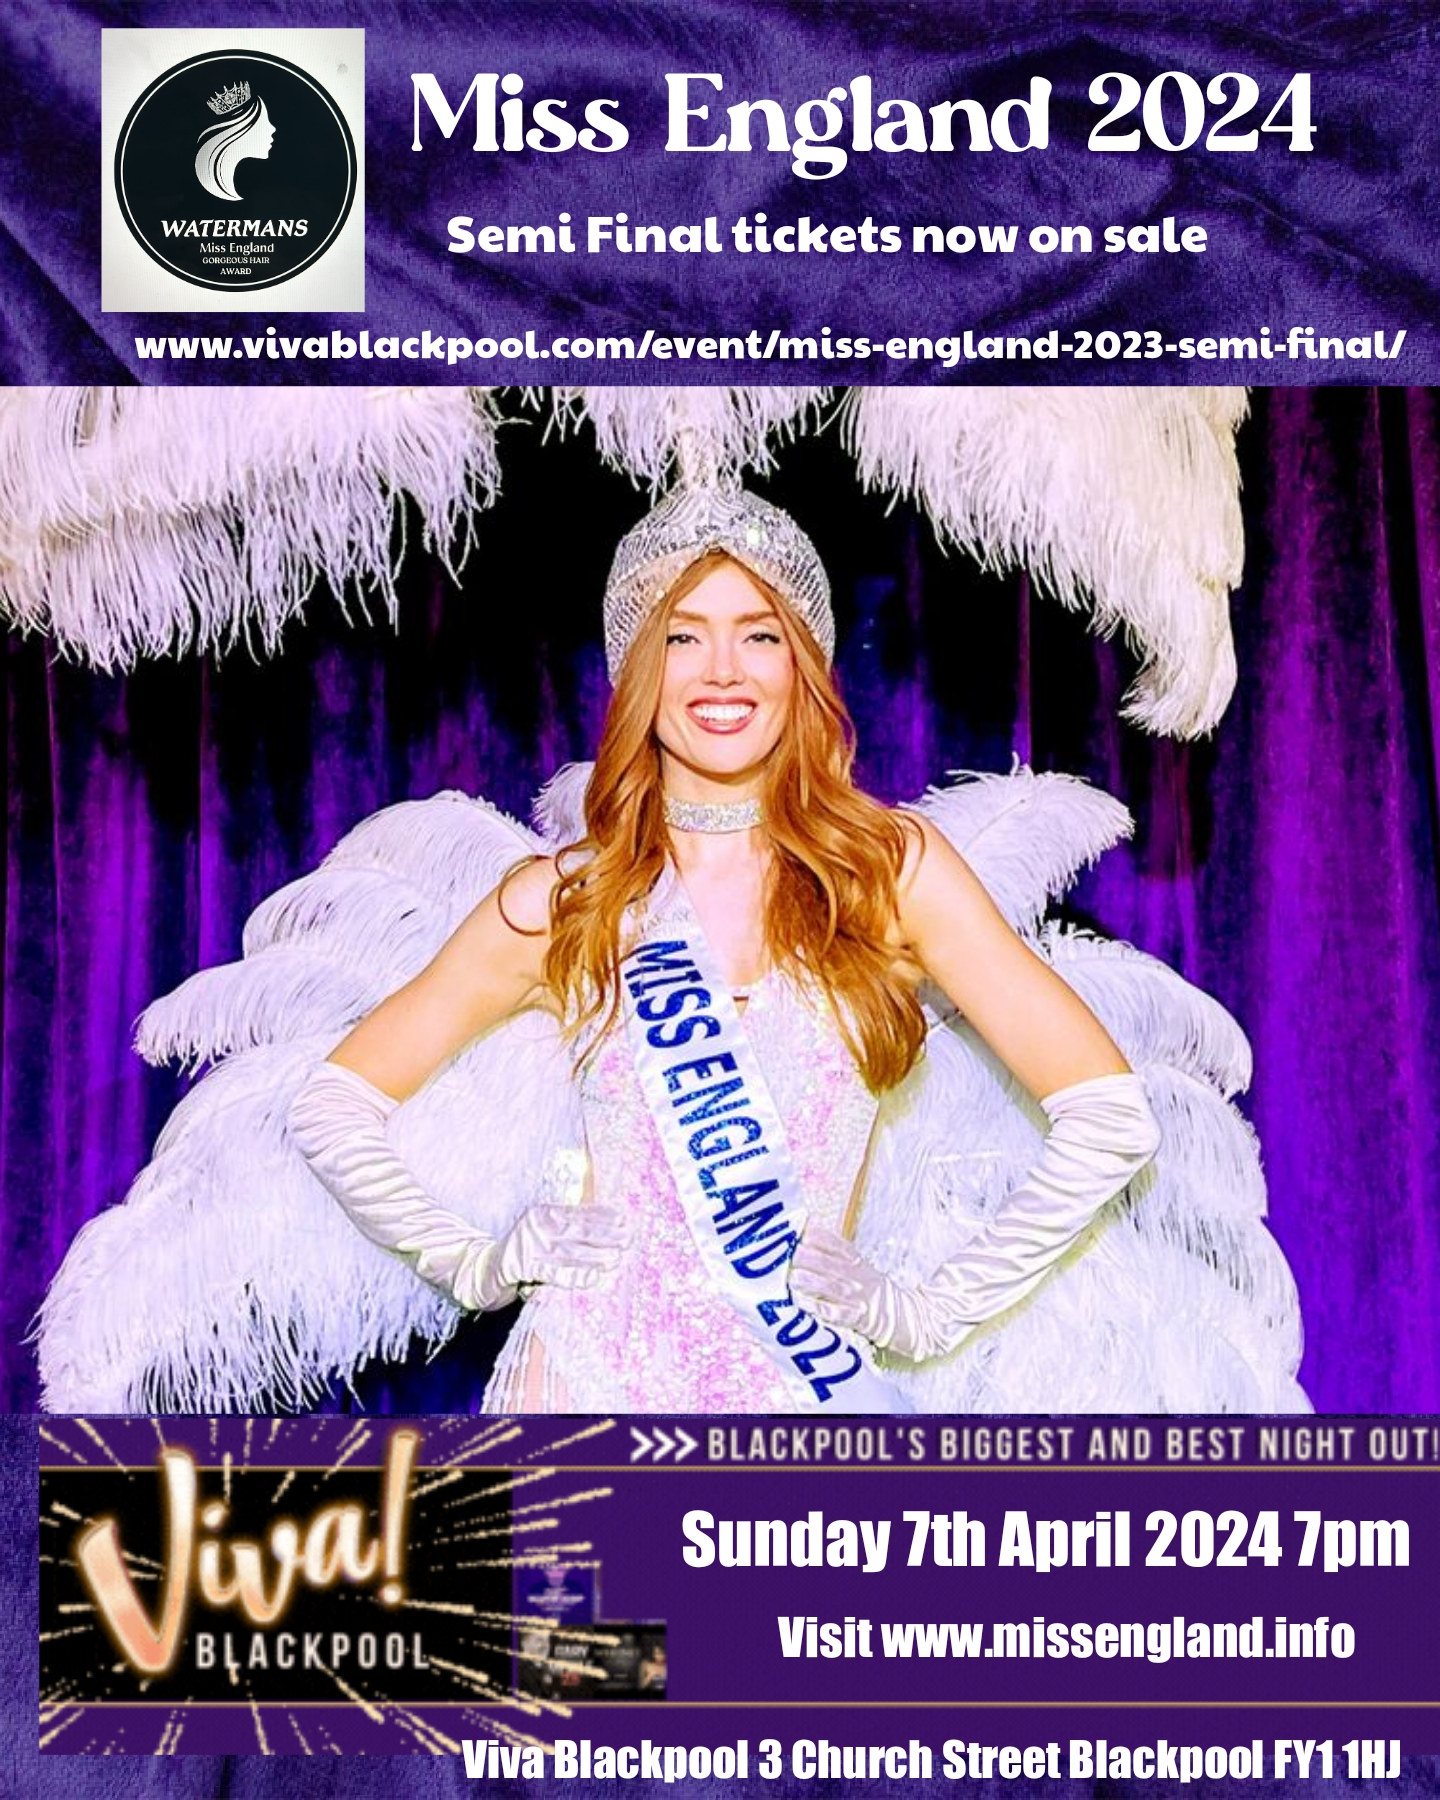 VIVA BLACKPOOL IS GETTING READY TO HOST THE MISS ENGLAND SEMI FINALS IN APRIL  